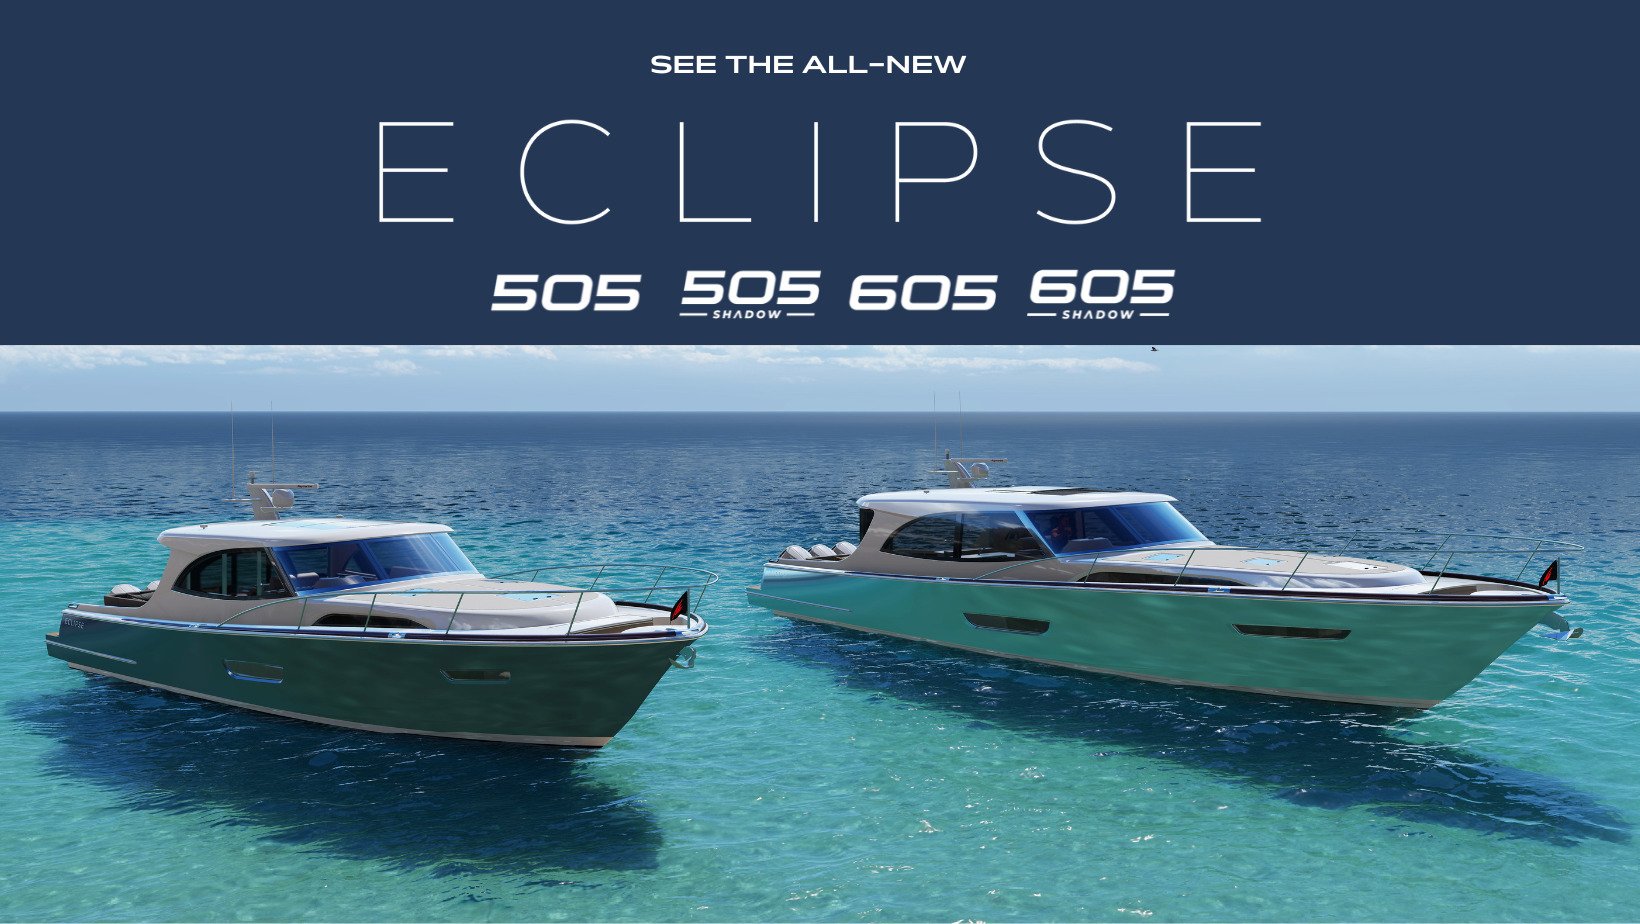 Two Oceans Marine Manufacturing and HMY Yacht Sales, Inc.  Launch All-New Express Cruiser Models